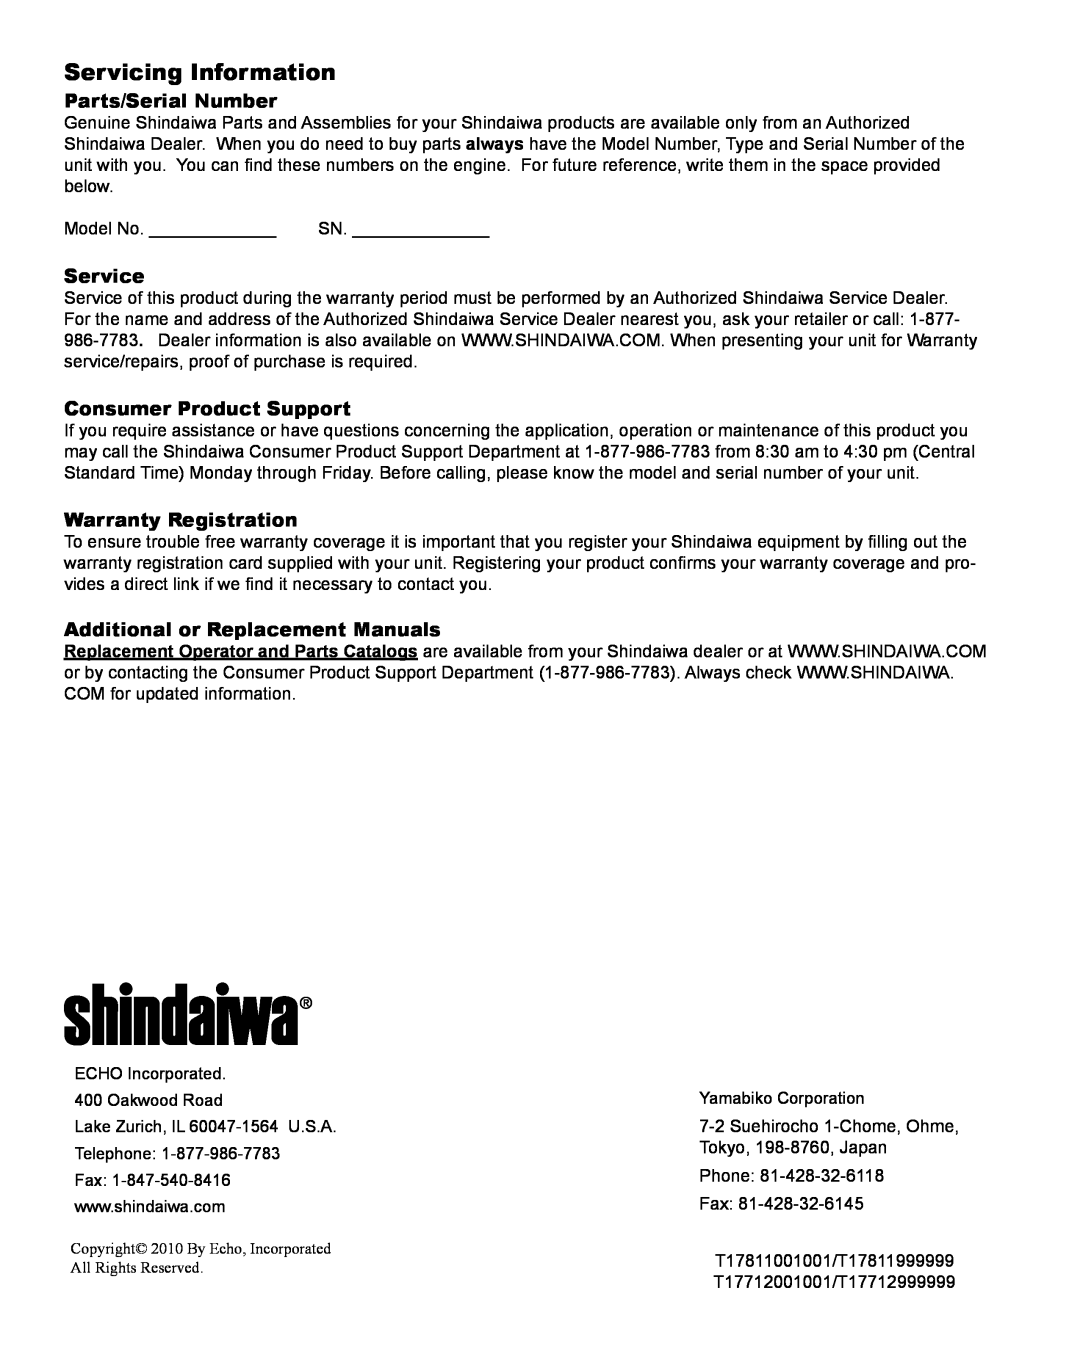 Shindaiwa X7502801200 Servicing Information, Parts/Serial Number, Service, Consumer Product Support, Warranty Registration 